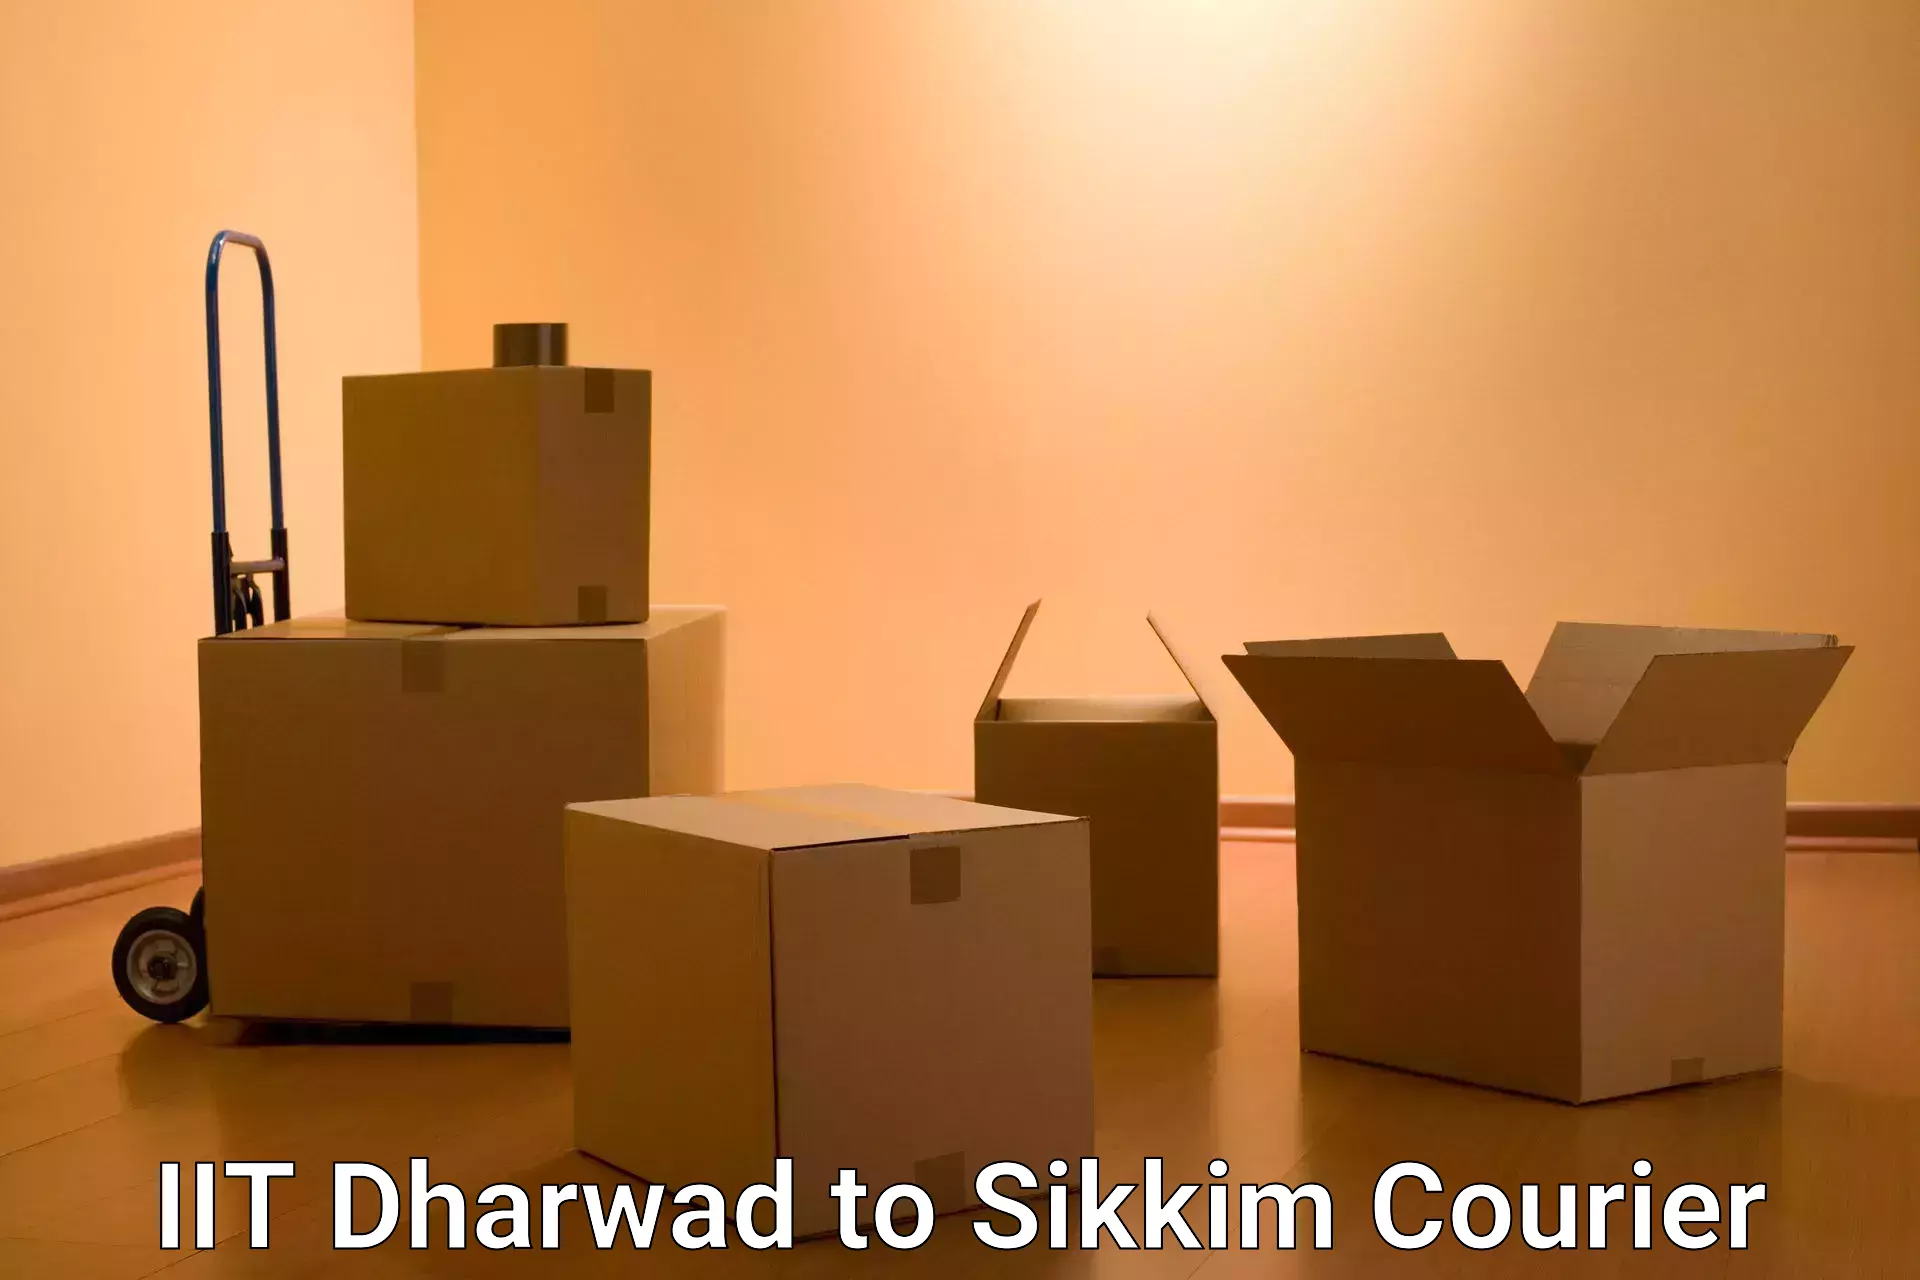 24-hour courier service IIT Dharwad to Sikkim